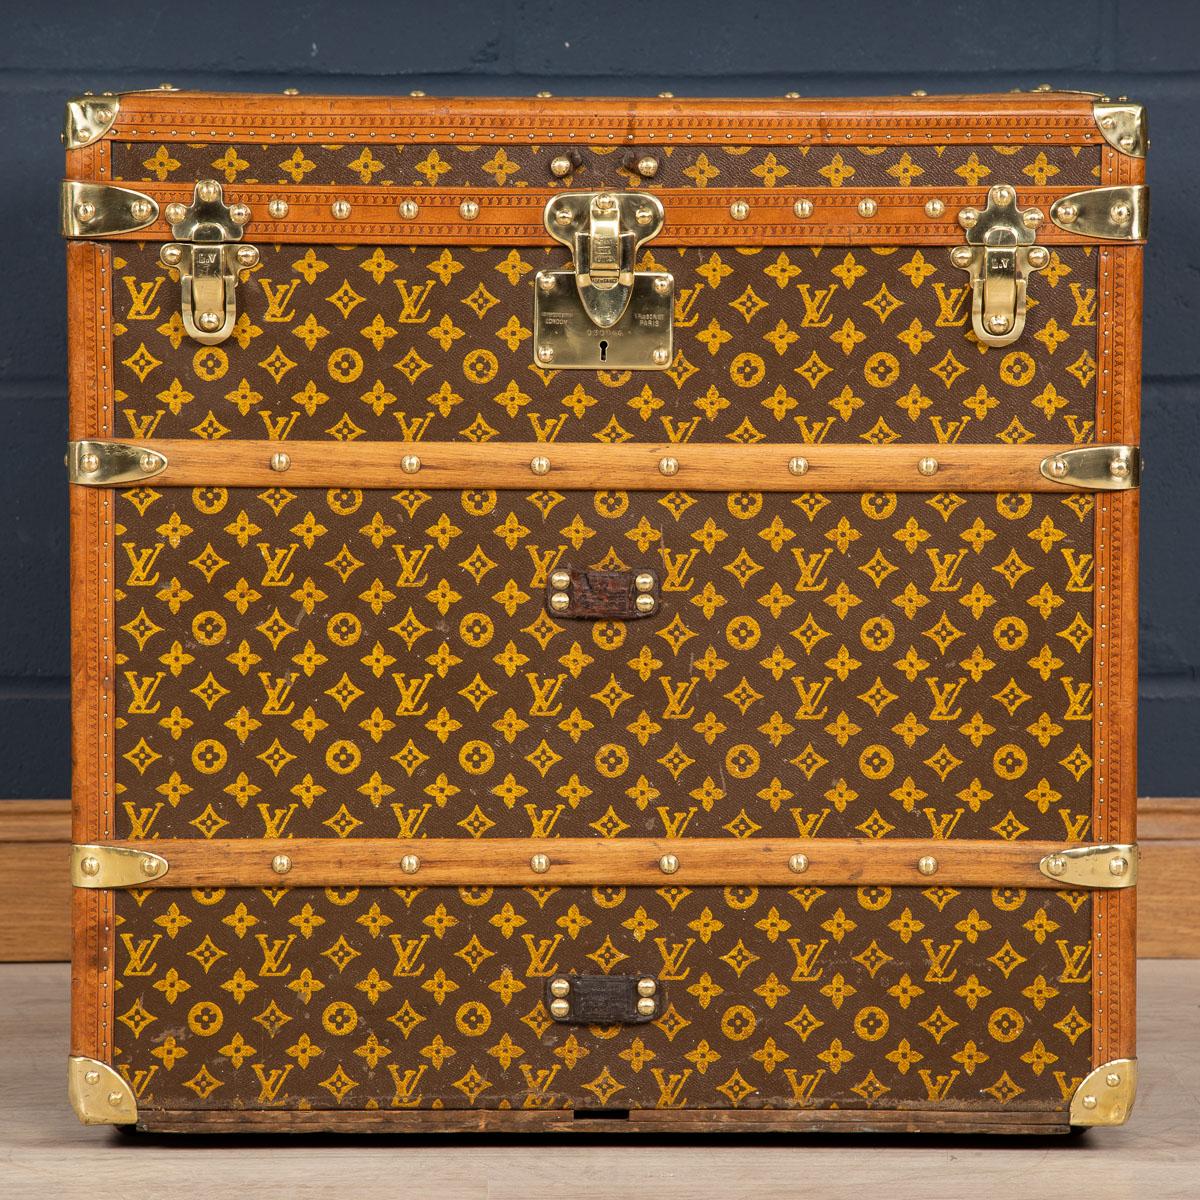 A superb example of an early 20th century Louis Vuitton hat trunk in the world famous monogrammed LV canvas, with its lozine borders and brass fitting it would have been the top of the line even at the time of purchase some 100 years ago. Complete